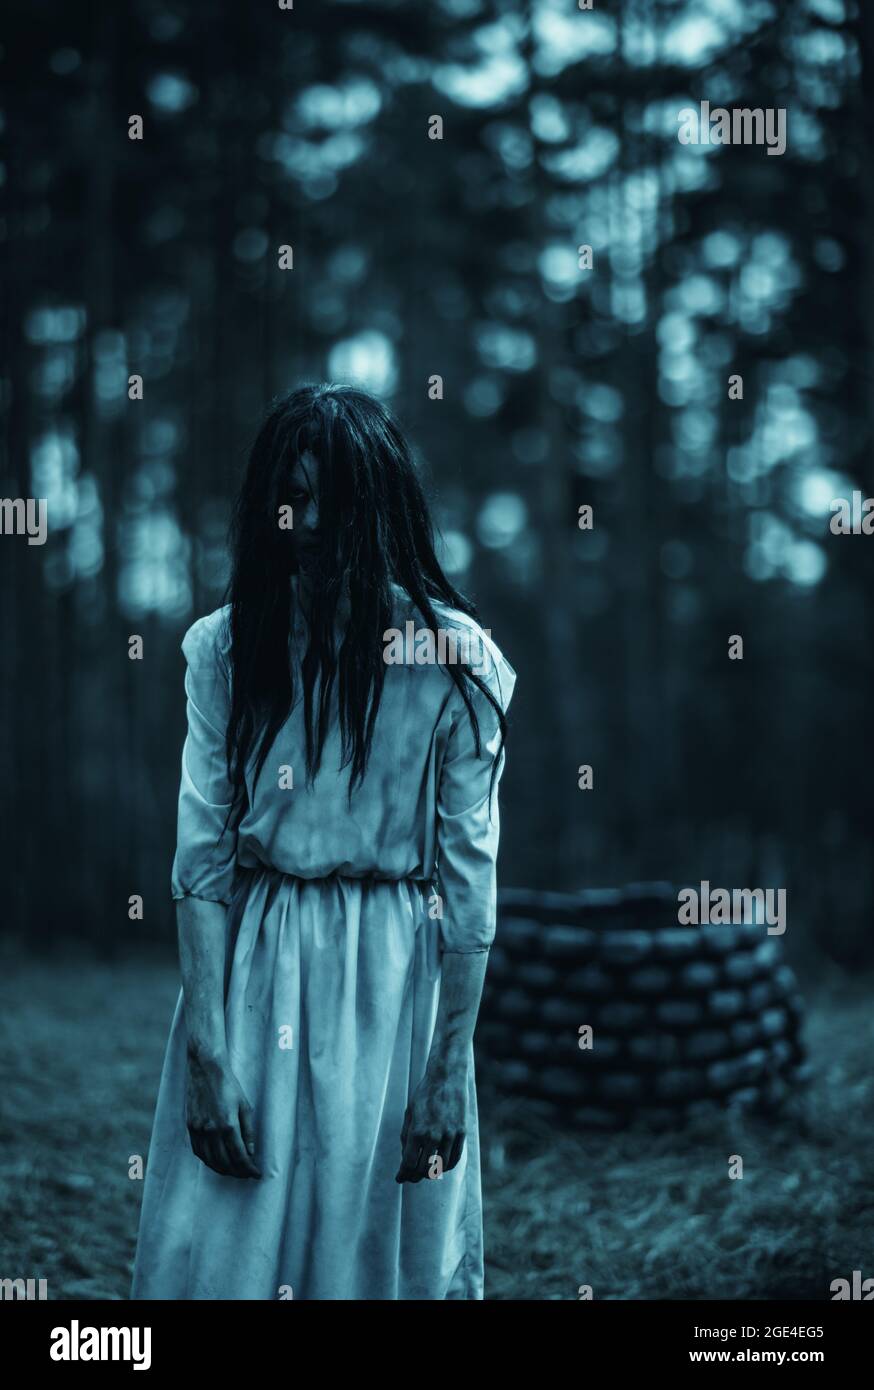 Girl with long black hair in image of scary ghost zombie walks among dark  forest against background of stone well Stock Photo - Alamy